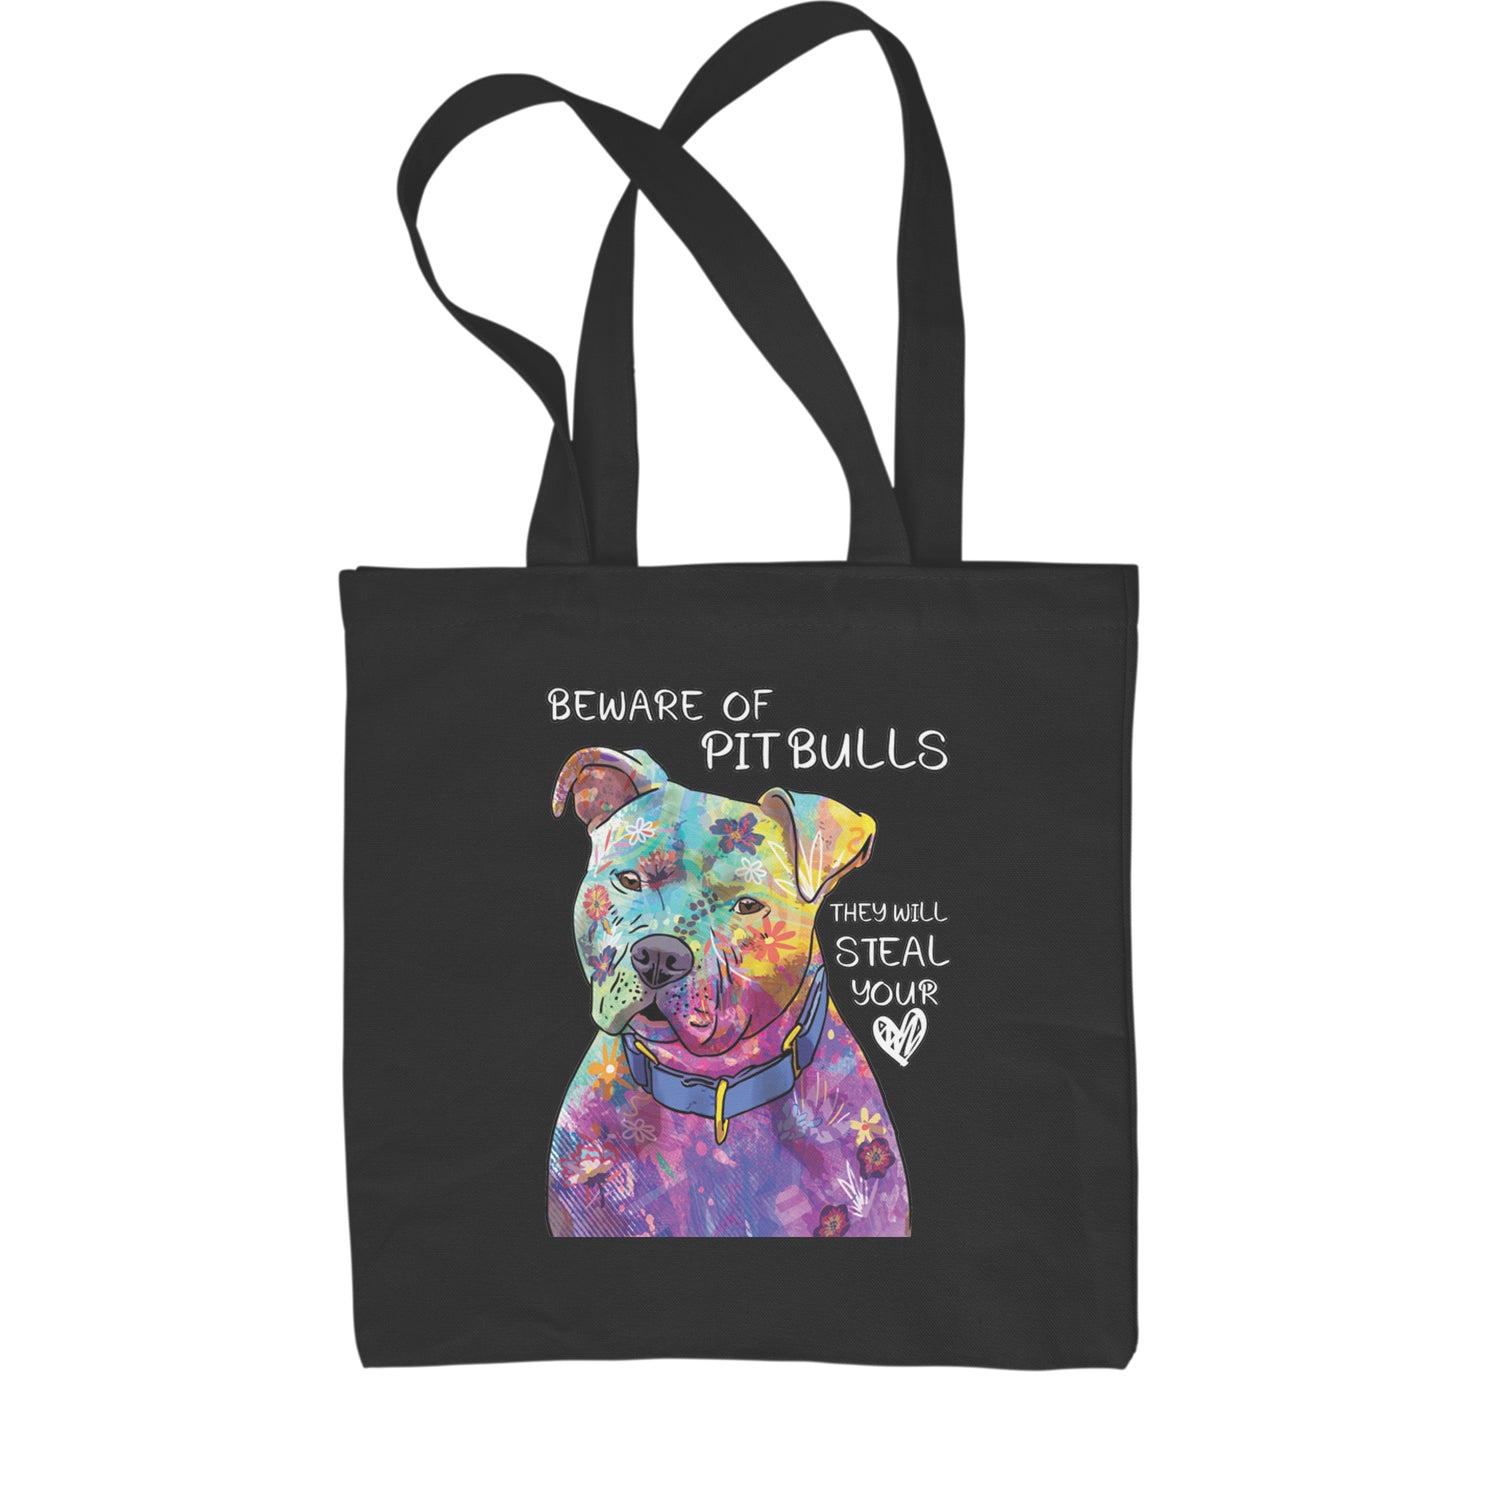 Beware Of Pit Bulls, They Will Steal Your Heart  Shopping Tote Bag